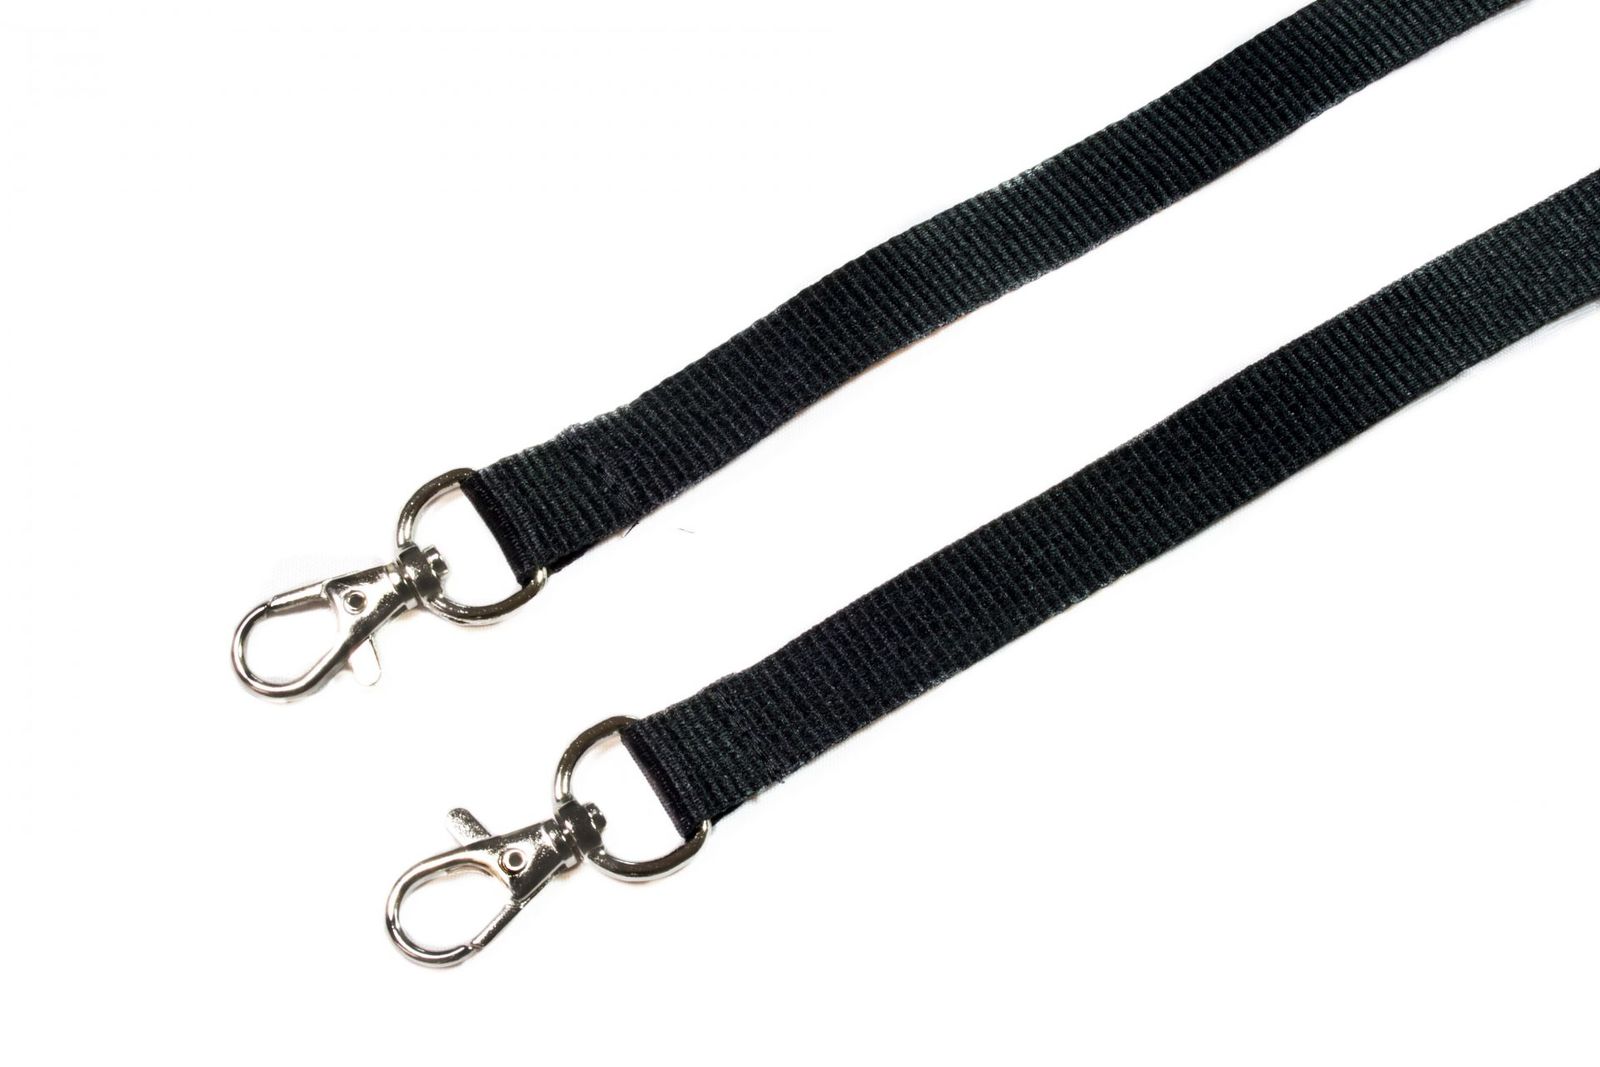 Buy Plain Black Double Ended Lanyards on Lanyards Direct Today!